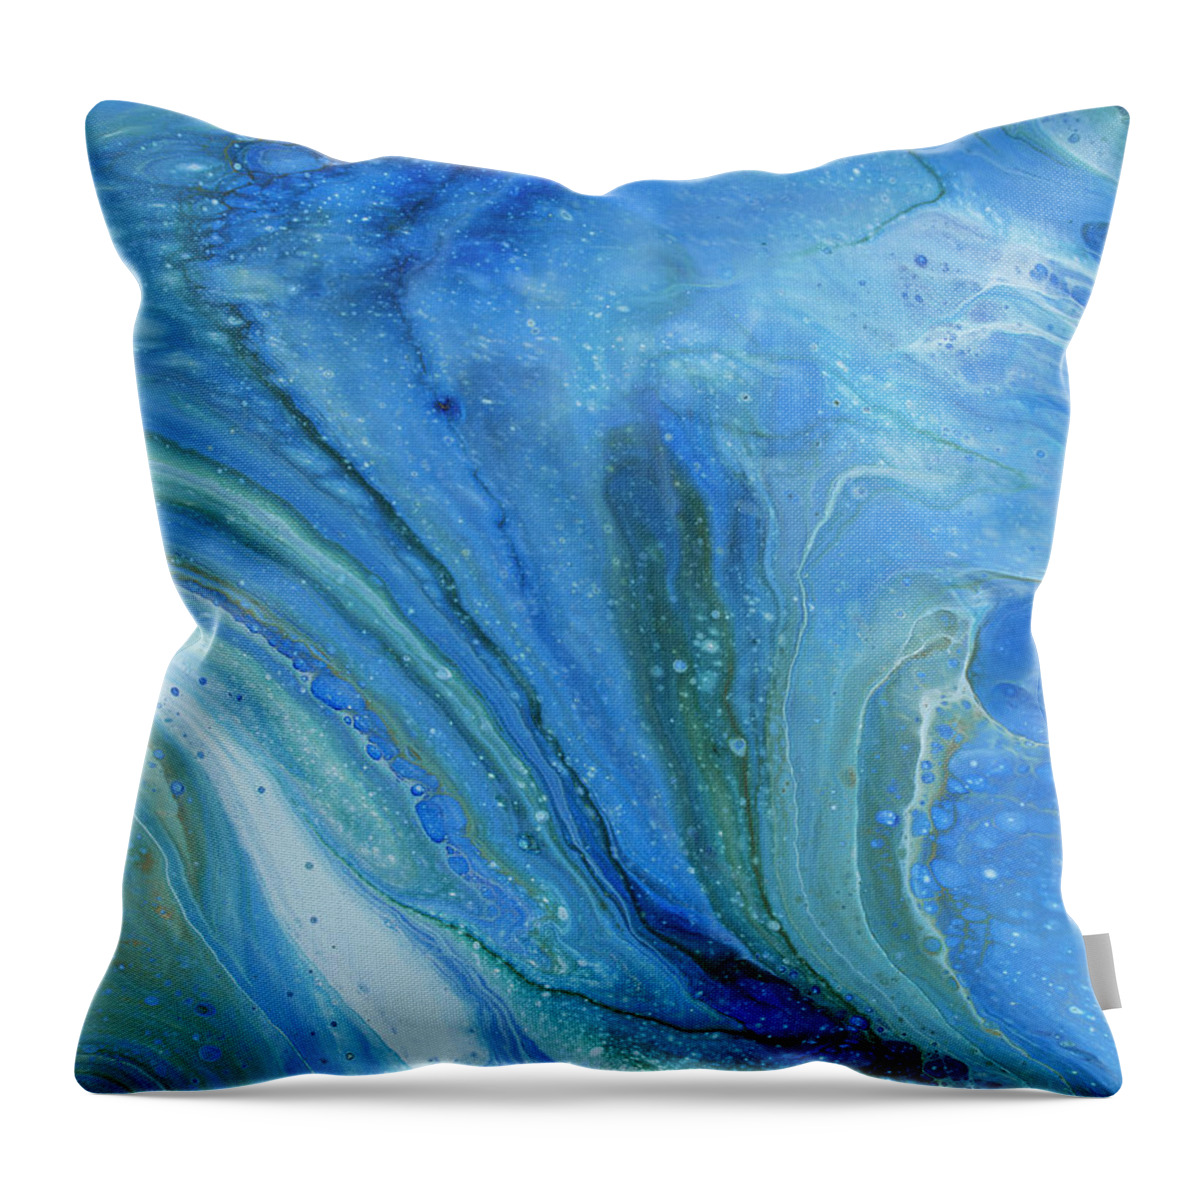 Abstract Throw Pillow featuring the painting Ocean Motion by Darice Machel McGuire